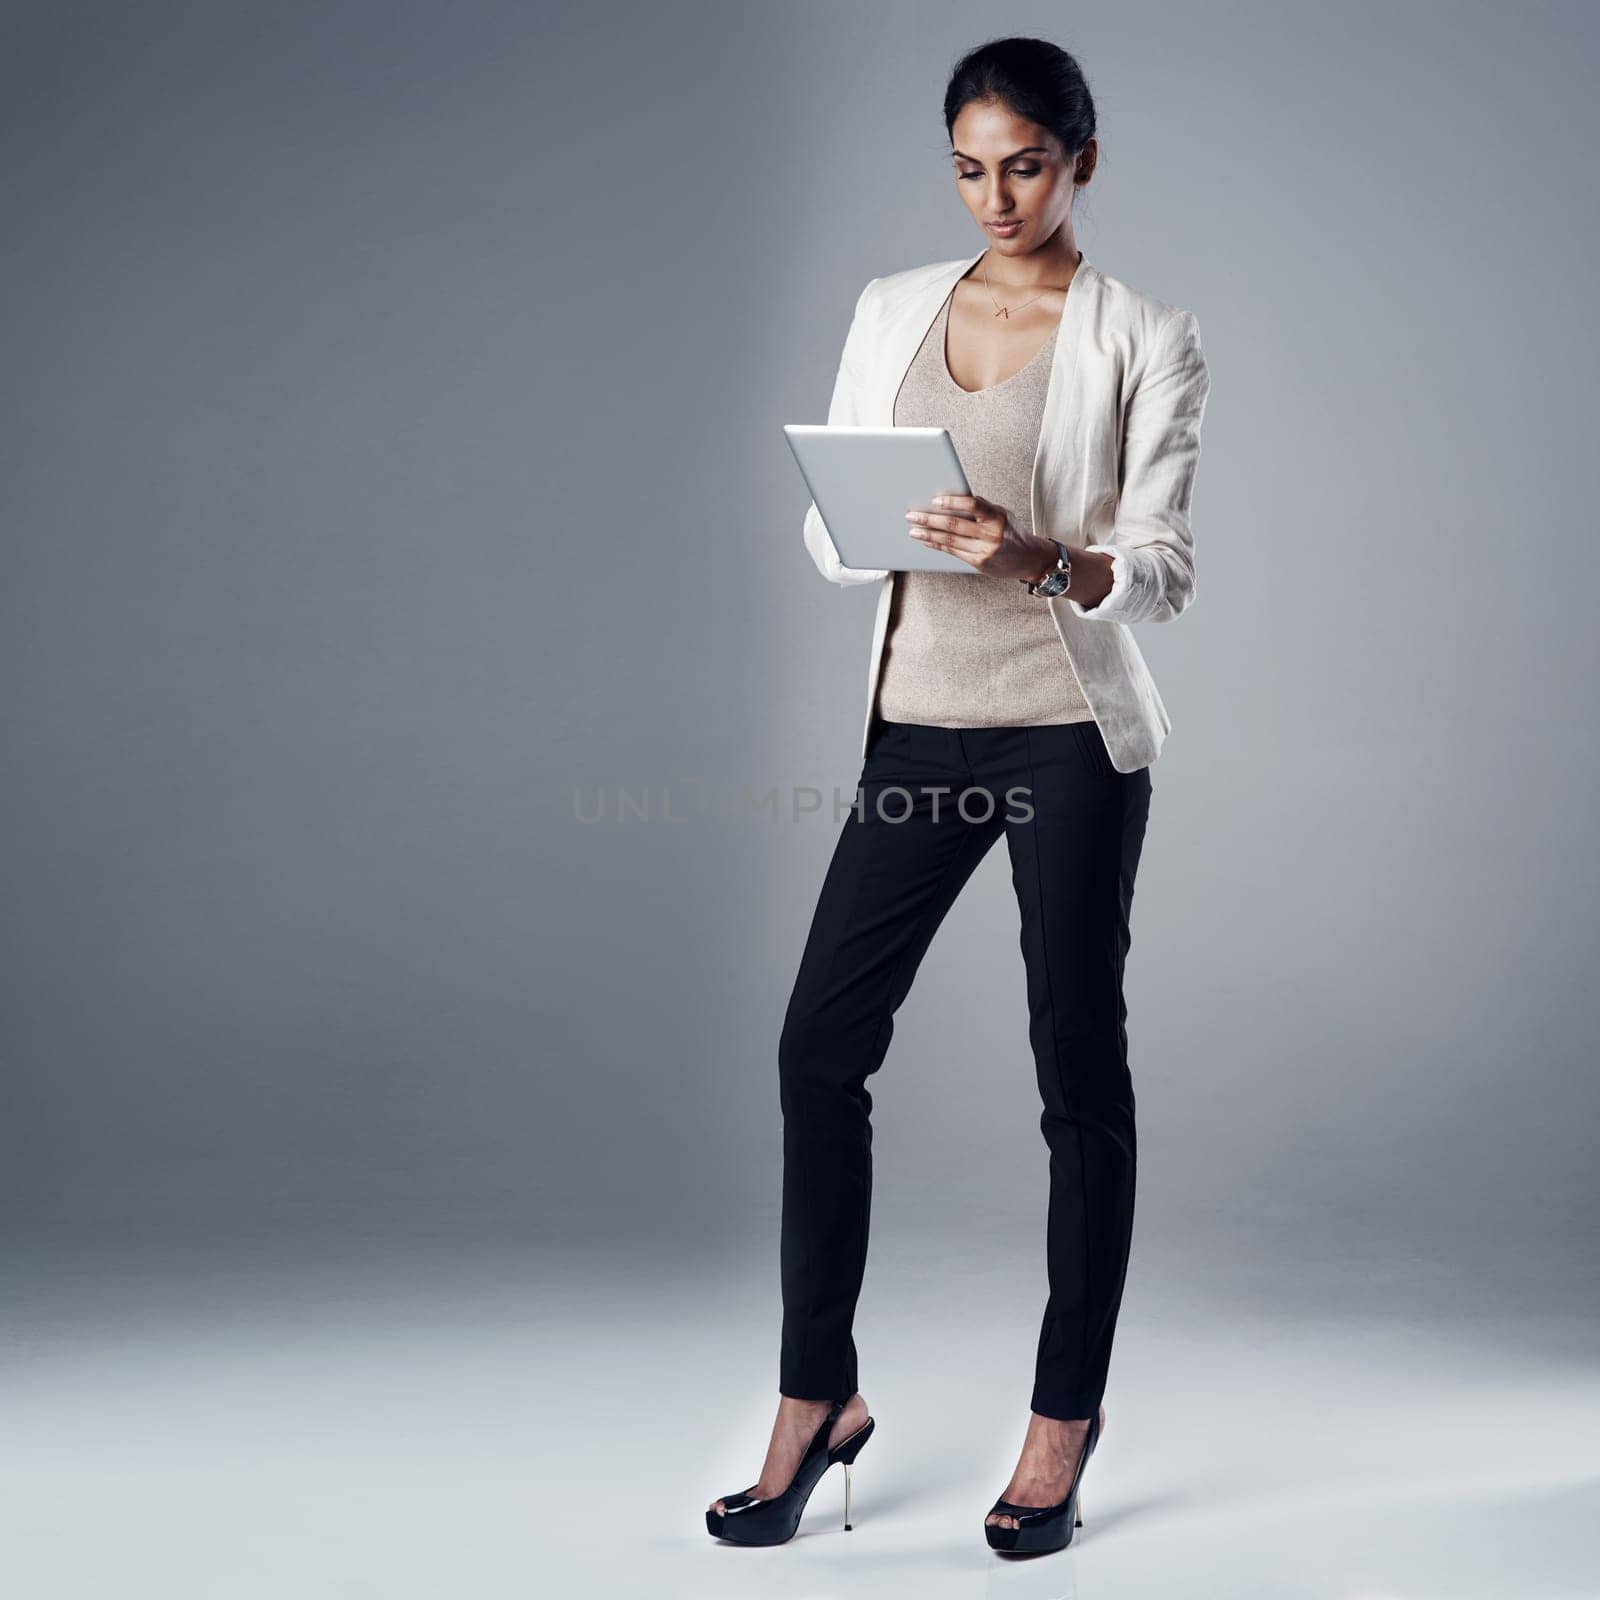 Tracking business trends online. Studio shot of a young businesswoman using a digital tablet against a gray background. by YuriArcurs